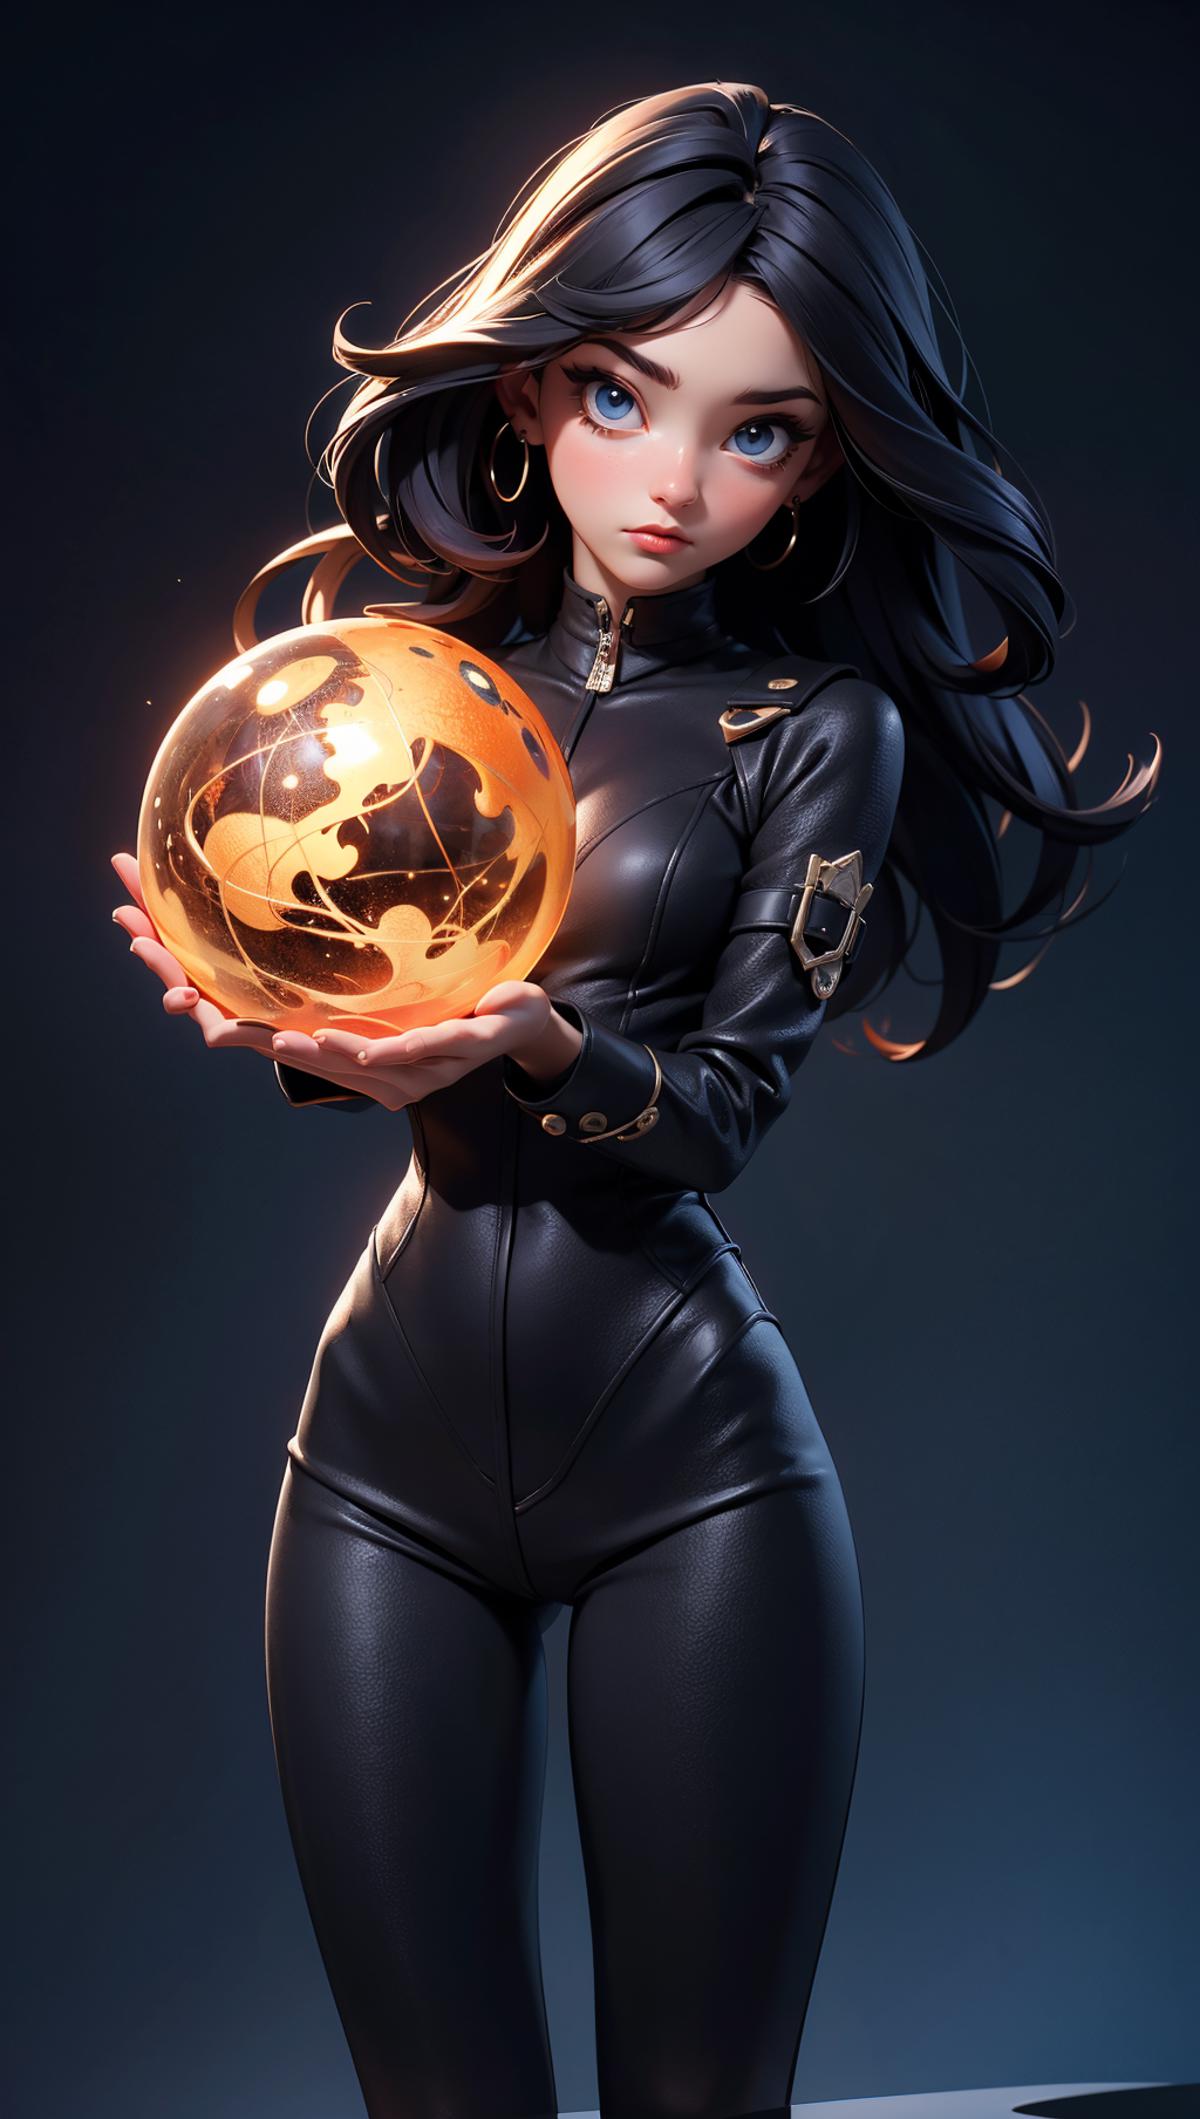 A woman in a black leather suit holding a gold globe.